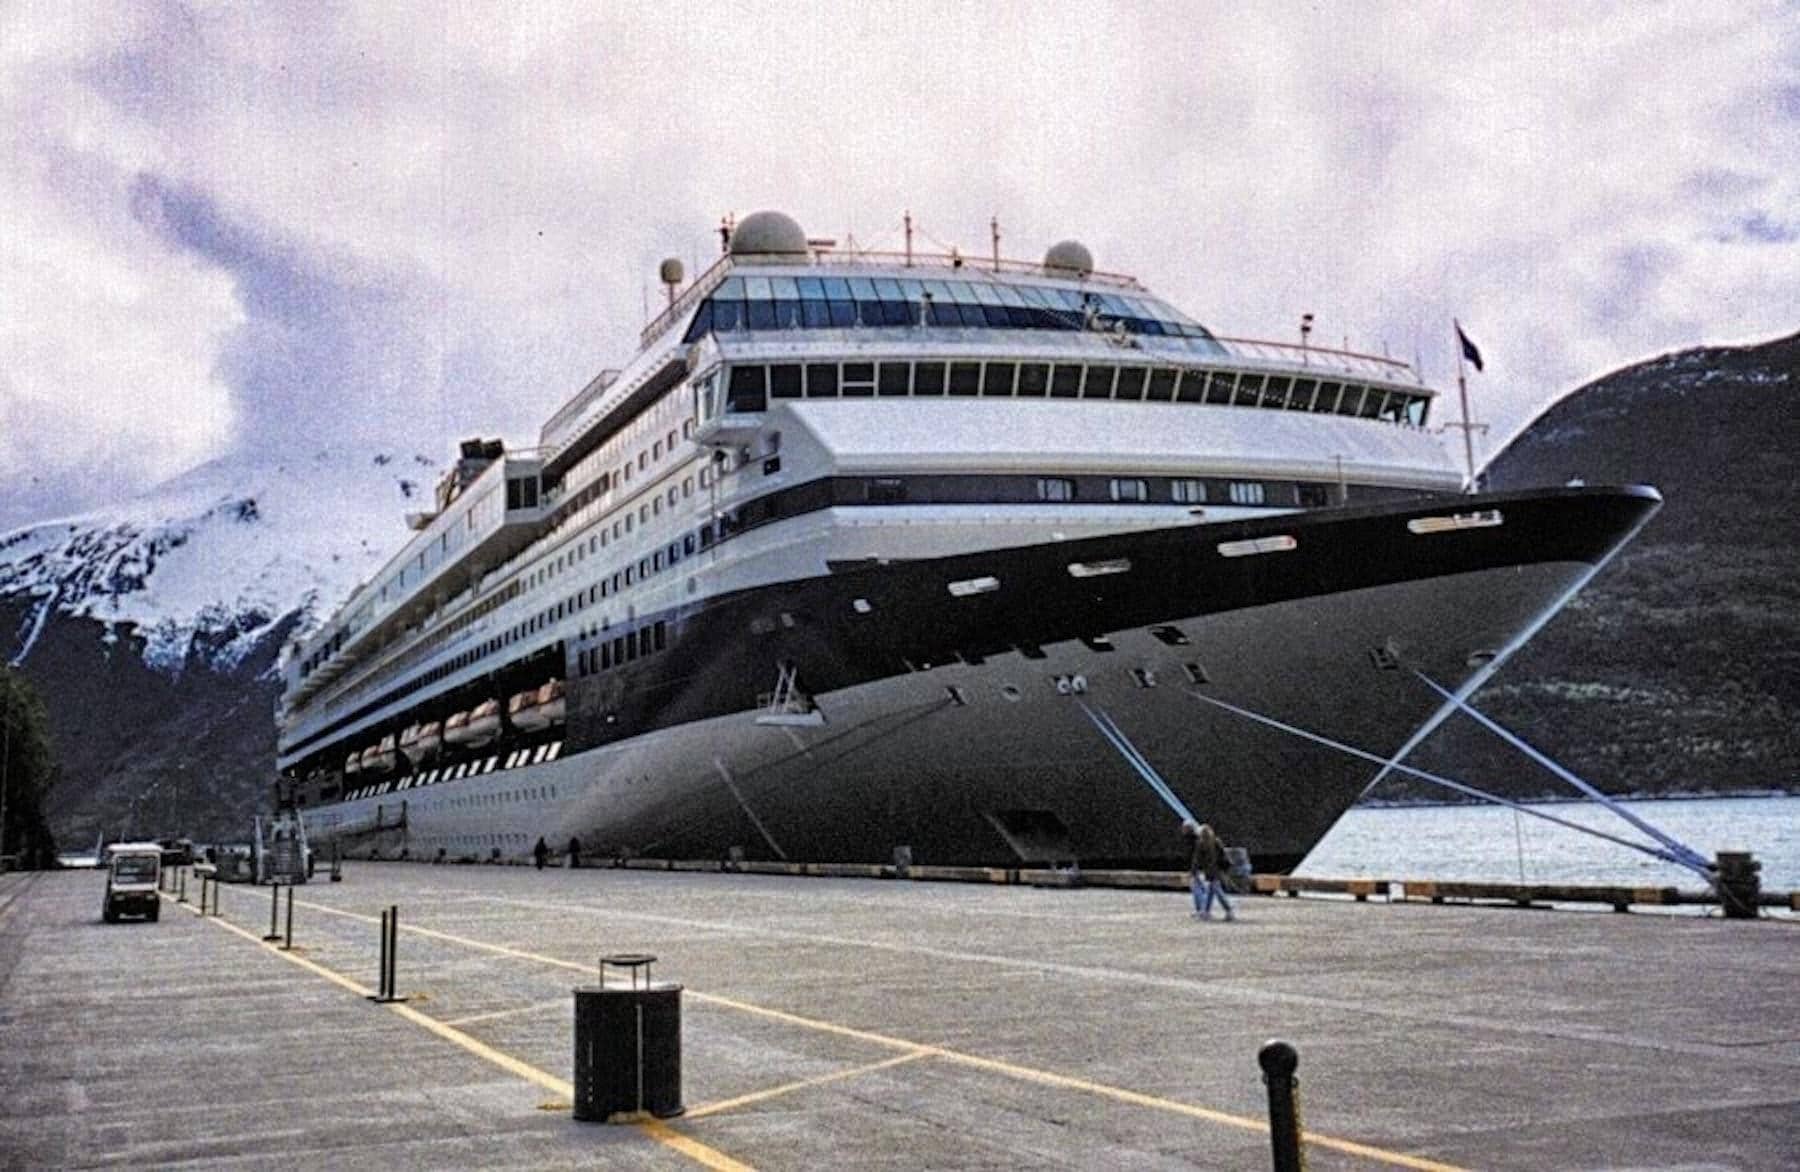 Alaska, the final frontier: These are the voyages of the cruise ship Mercury.